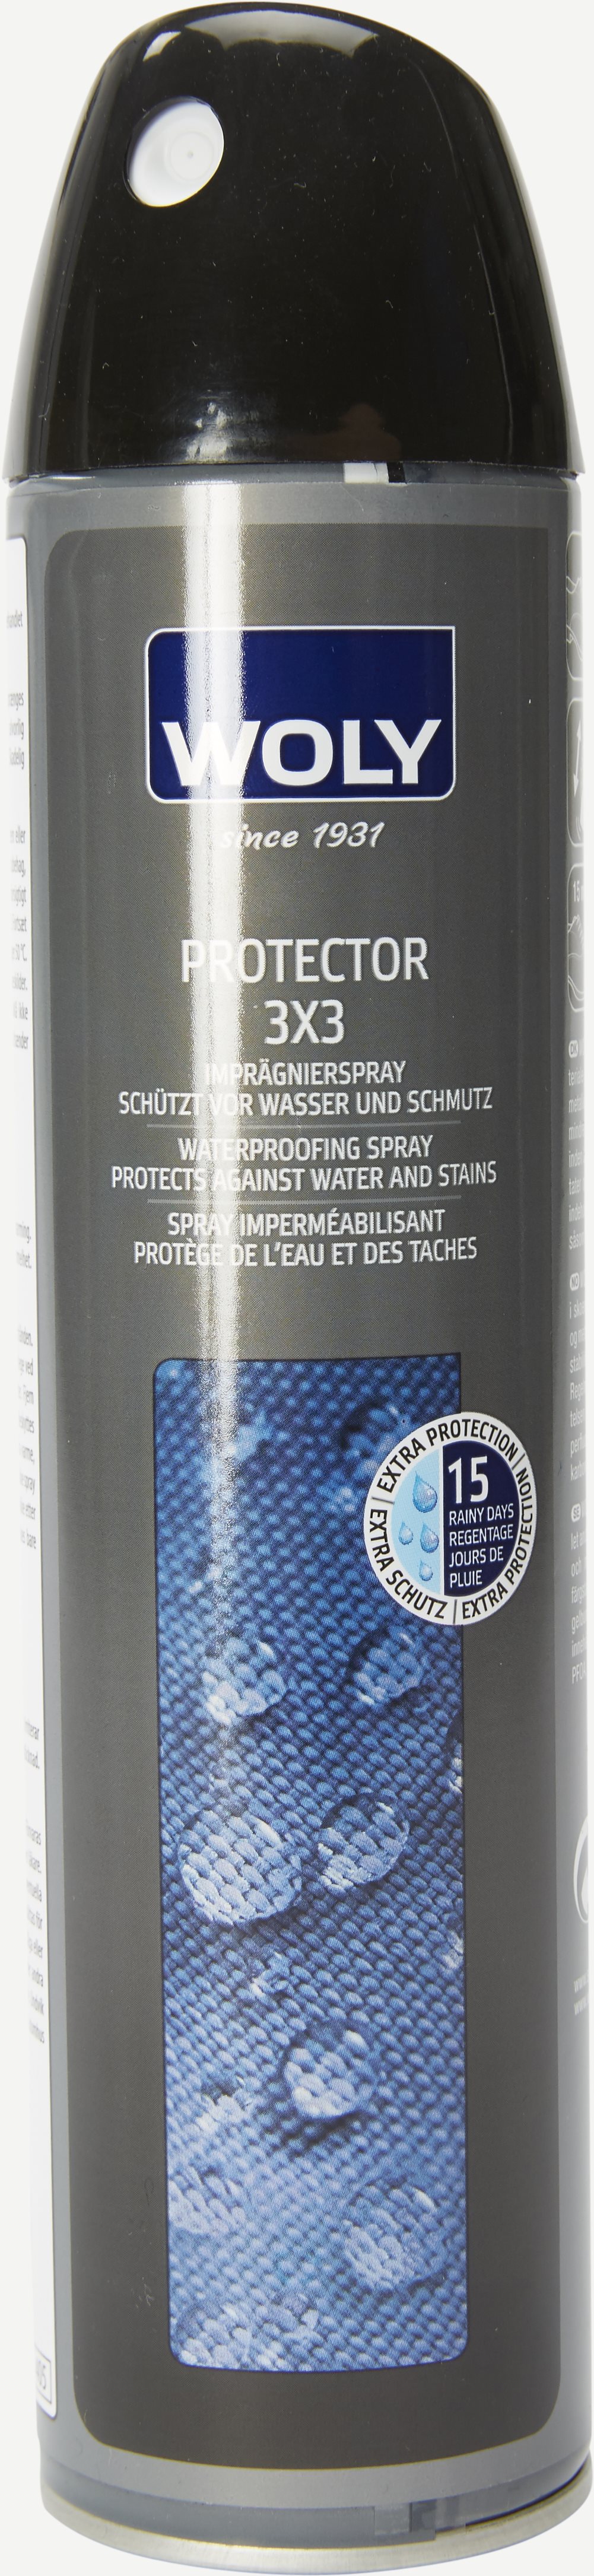 Woly Protector 3X3 Impregnation - Accessories - Grey